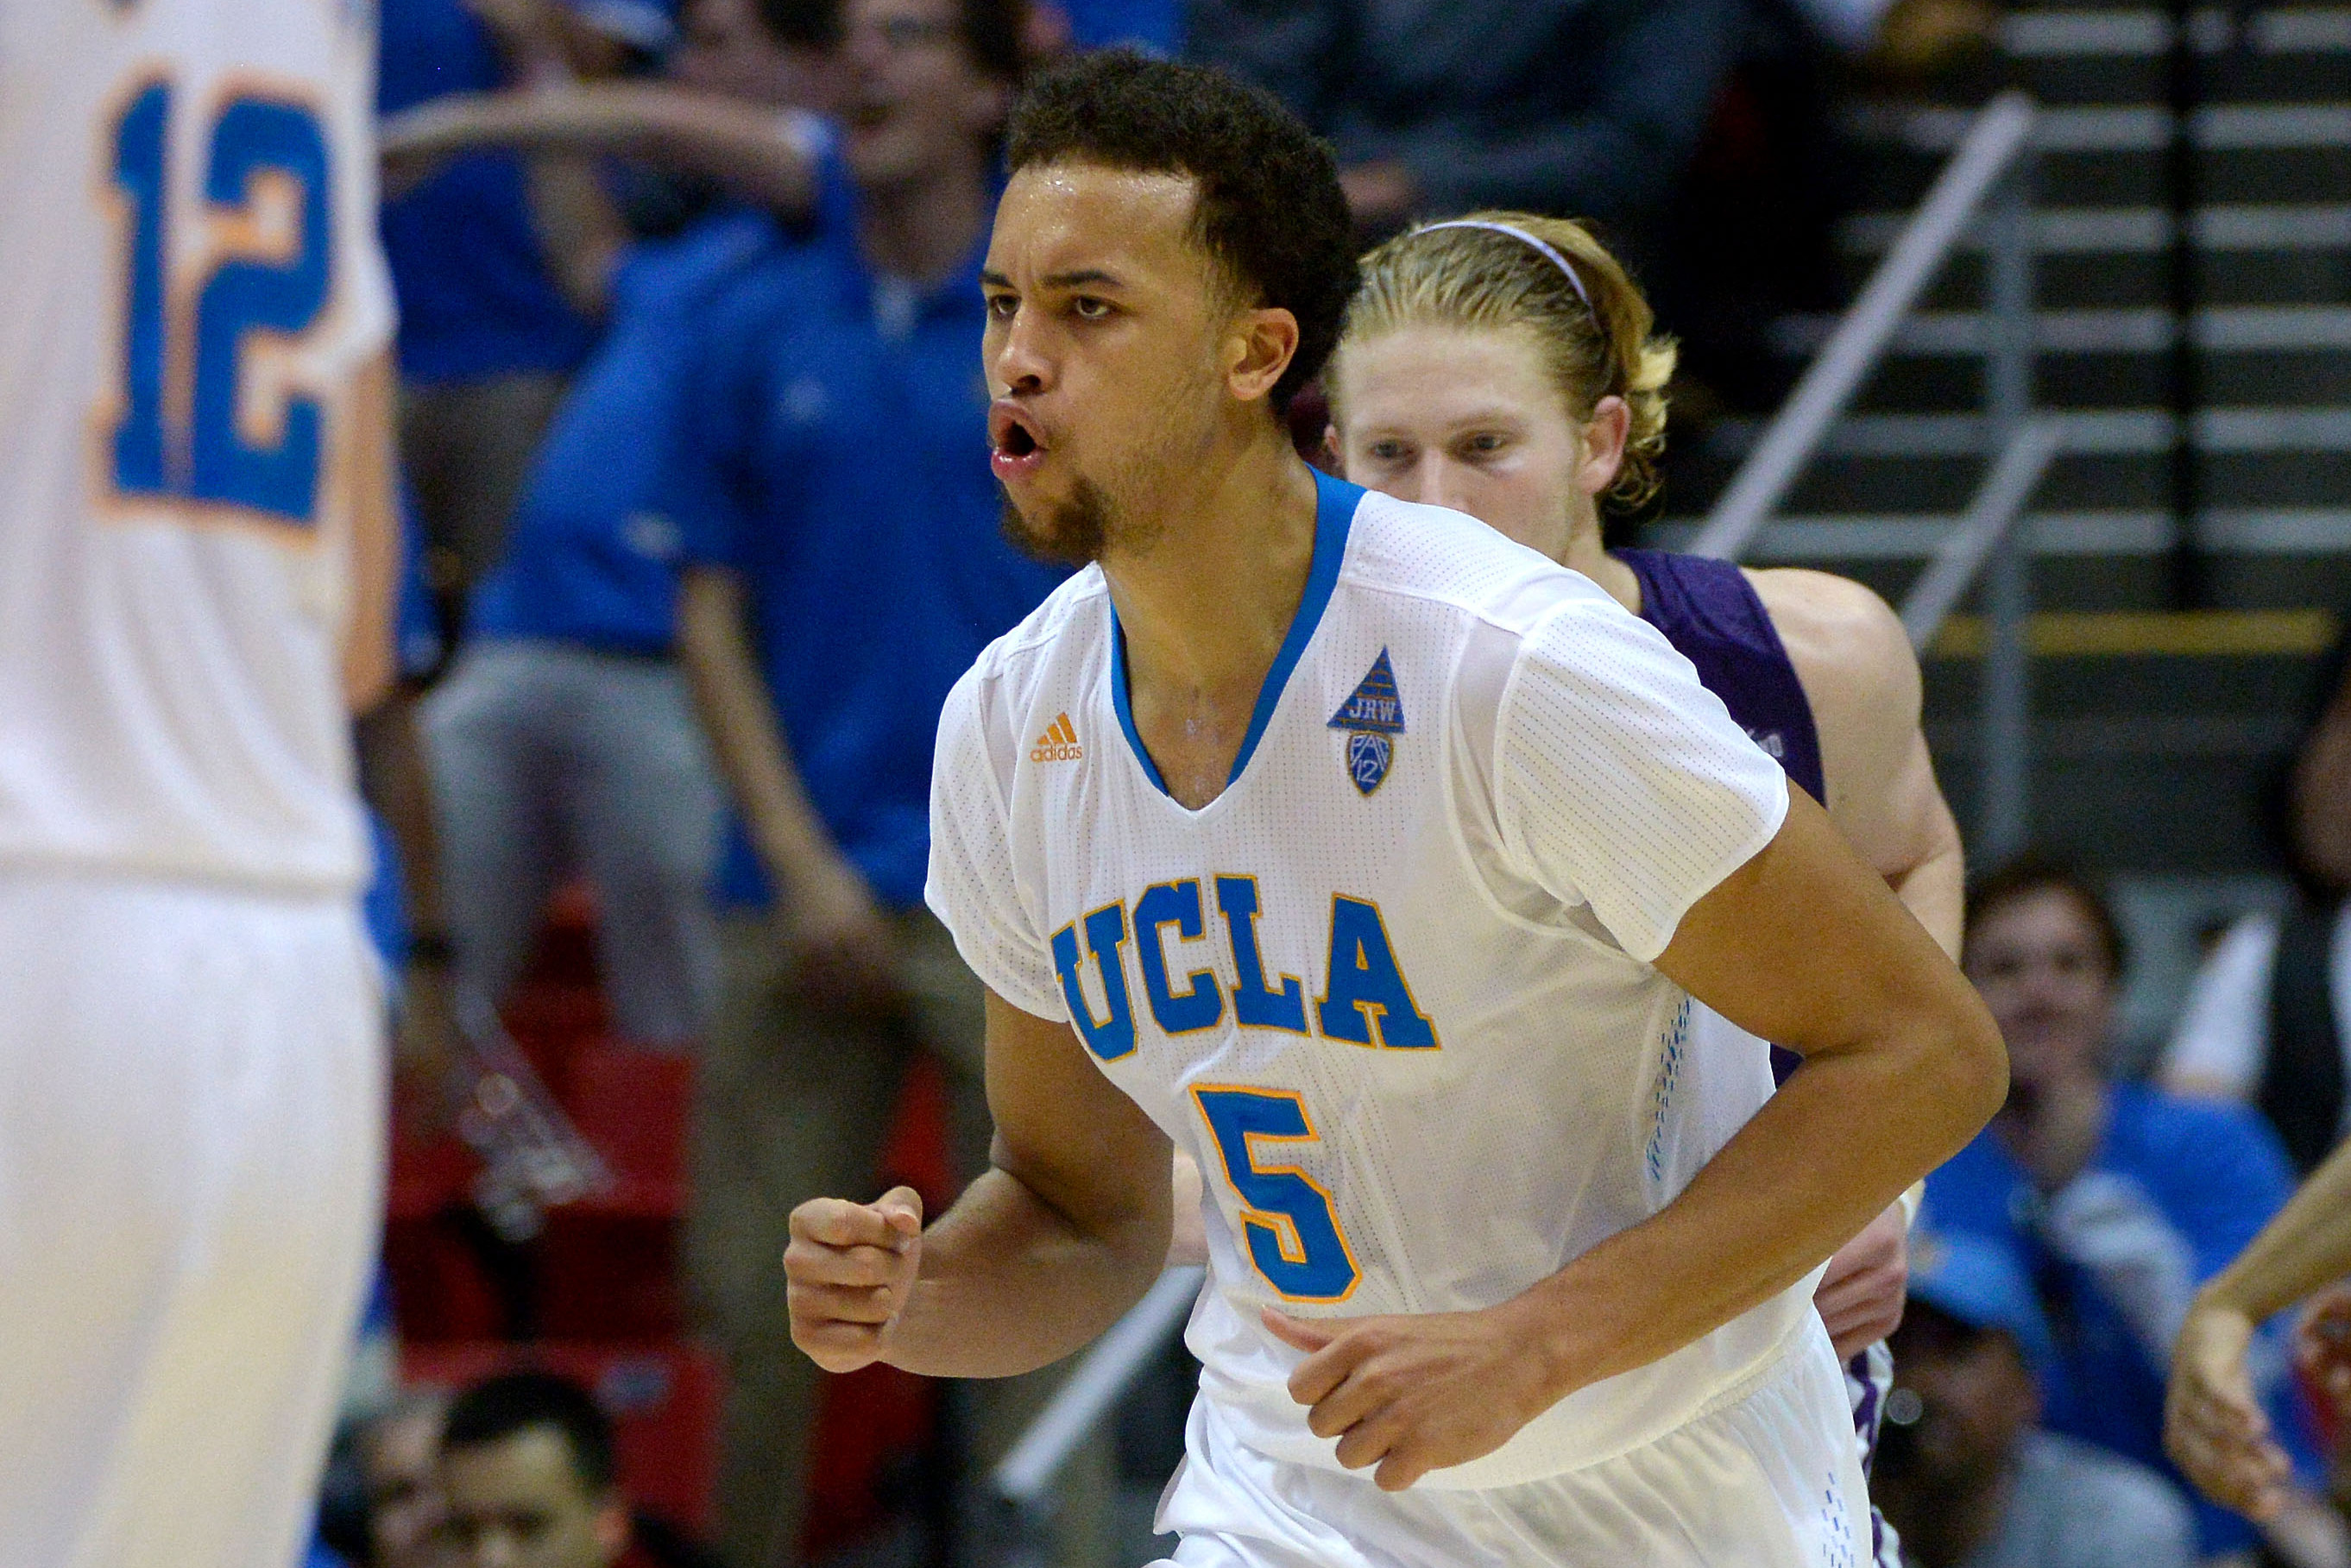 Kyle Anderson, New Jersey's top basketball recruit, will go to